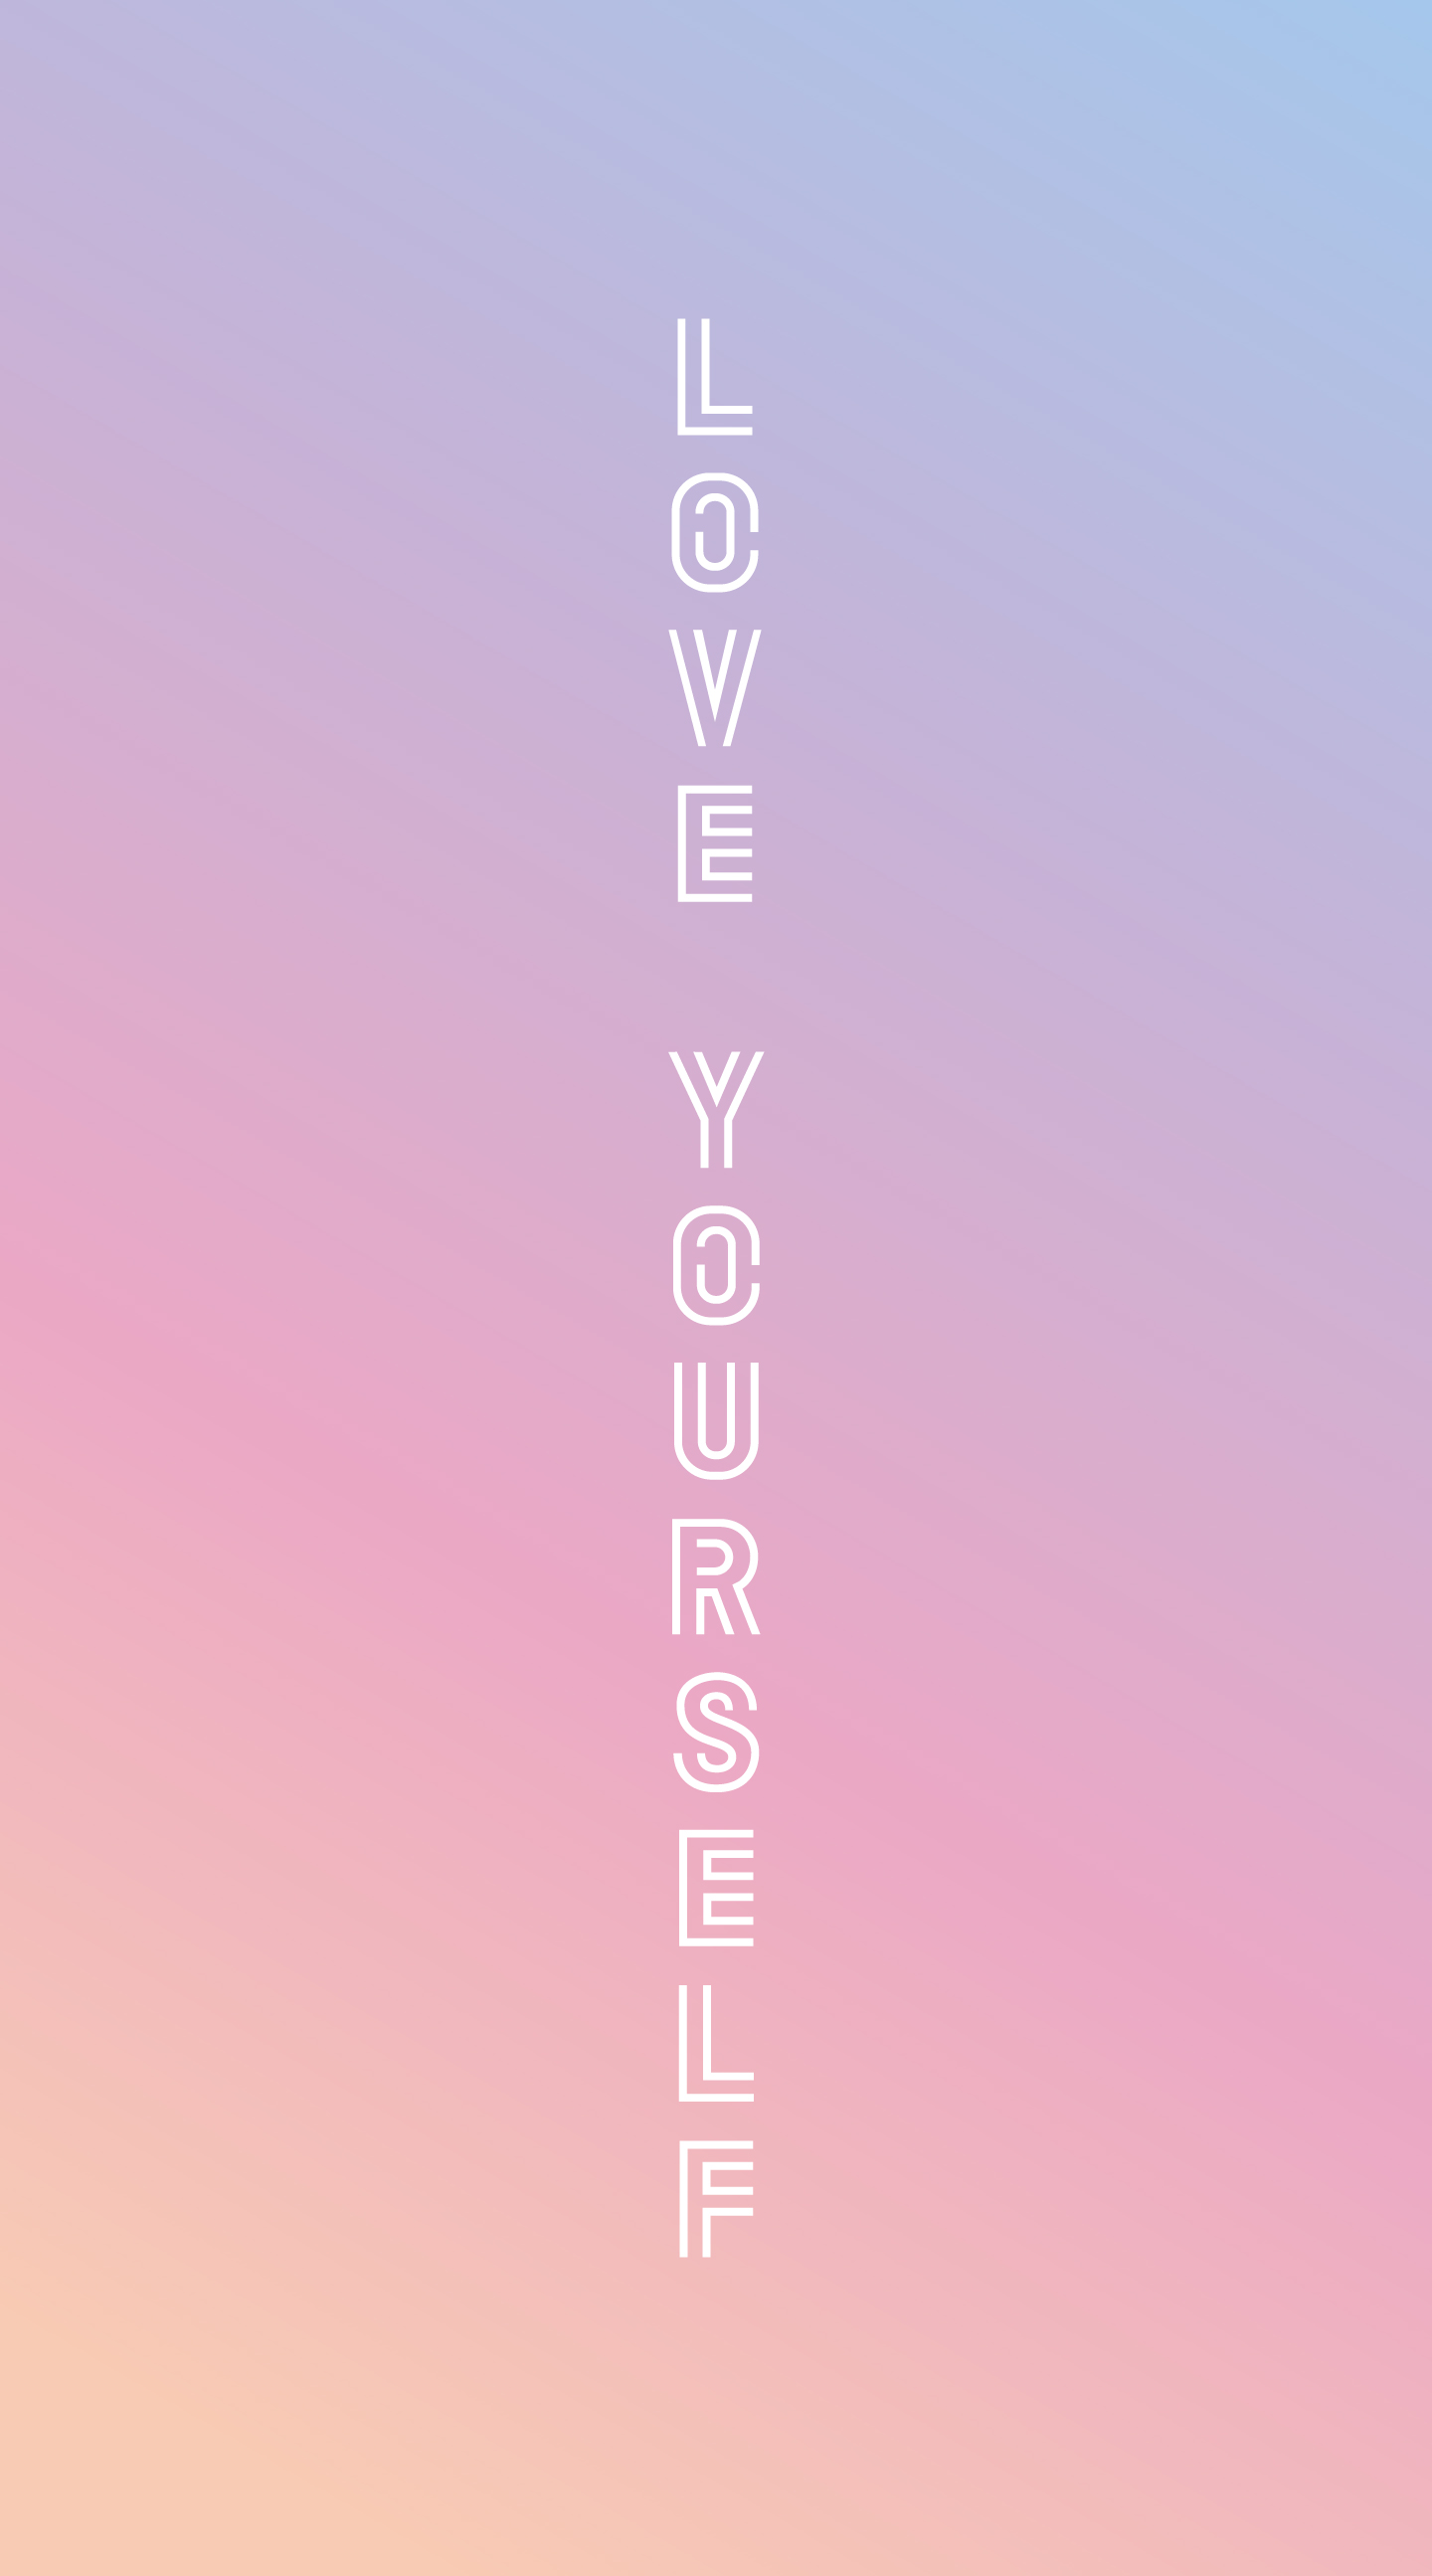 Bts Love Yourself Photos Wallpapers